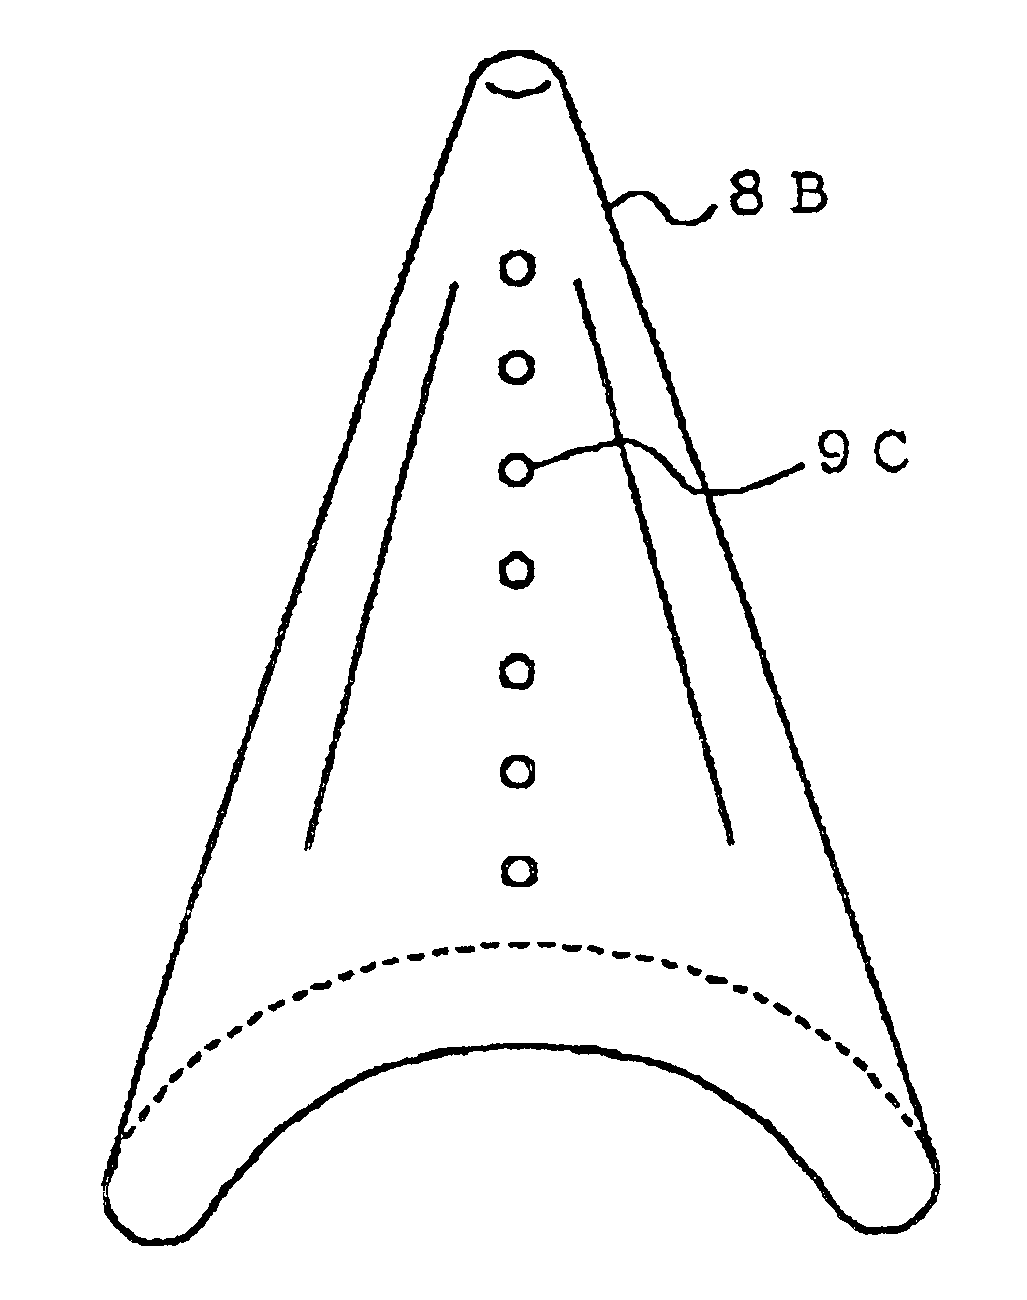 Air-tight vessel equipped with gas feeder uniformly supplying gaseous component around plural wafers